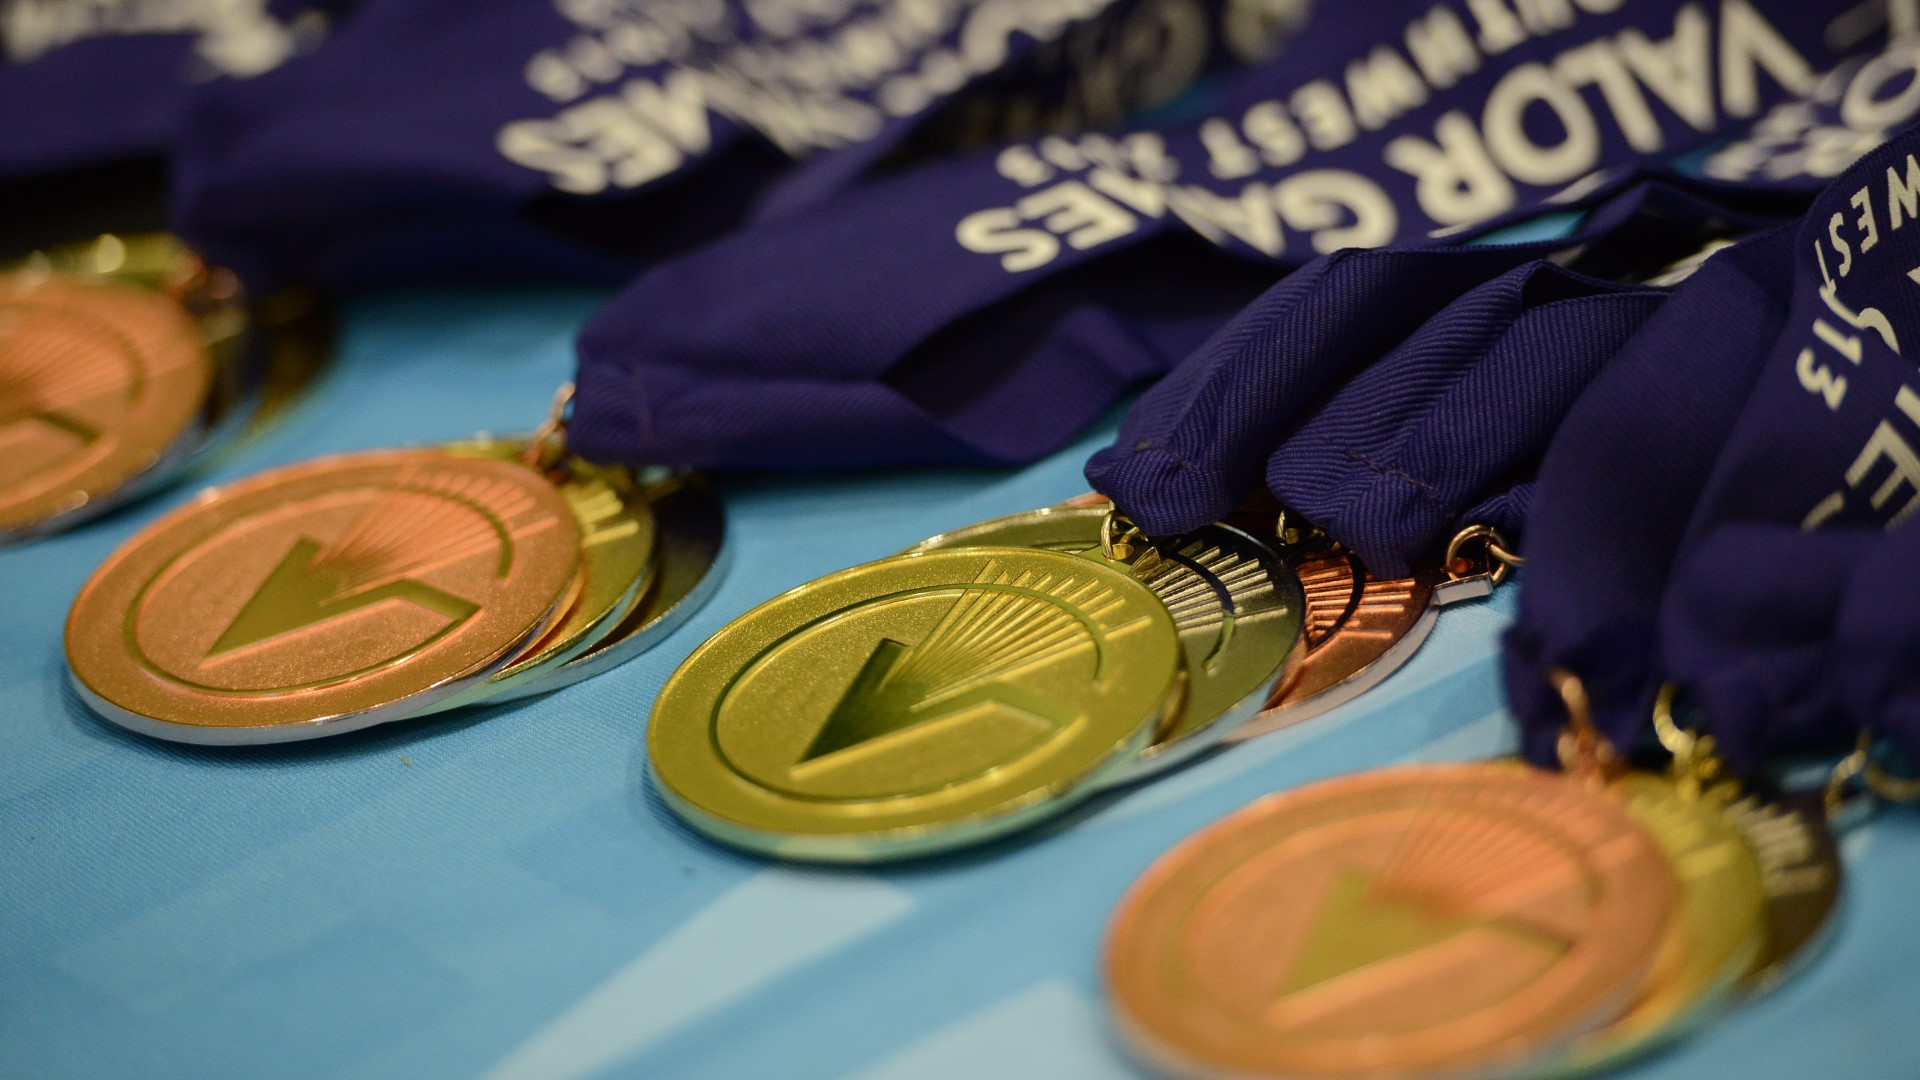 Veterans with physical disabilities compete in various games including air guns, archery, boccie ball, cycling, powerlifting, table tennis, and rowing.